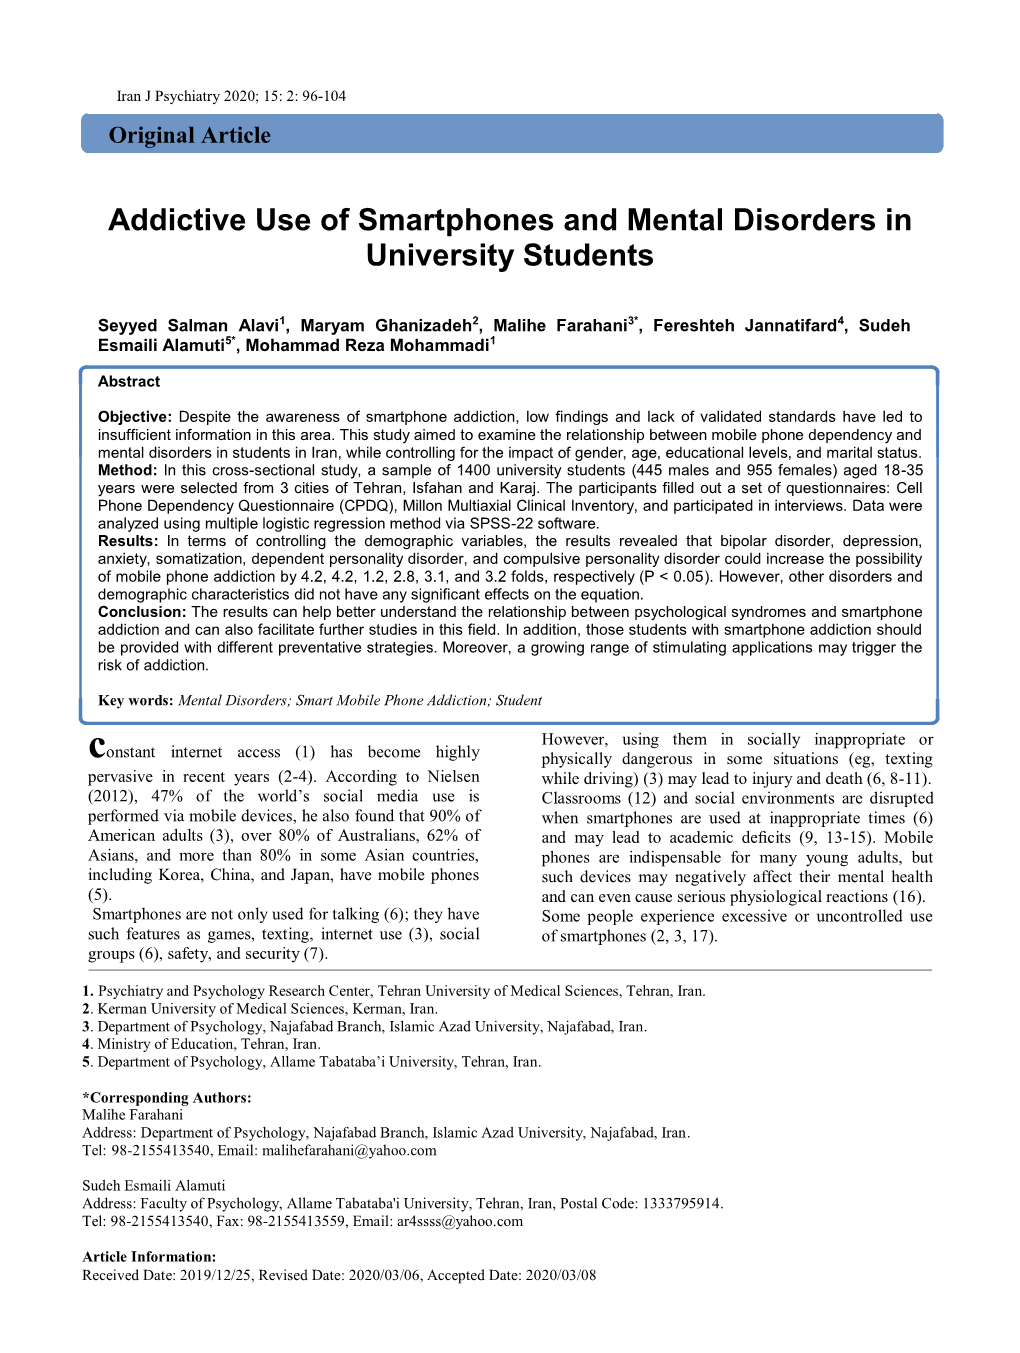 Addictive Use of Smartphones and Mental Disorders in University Students